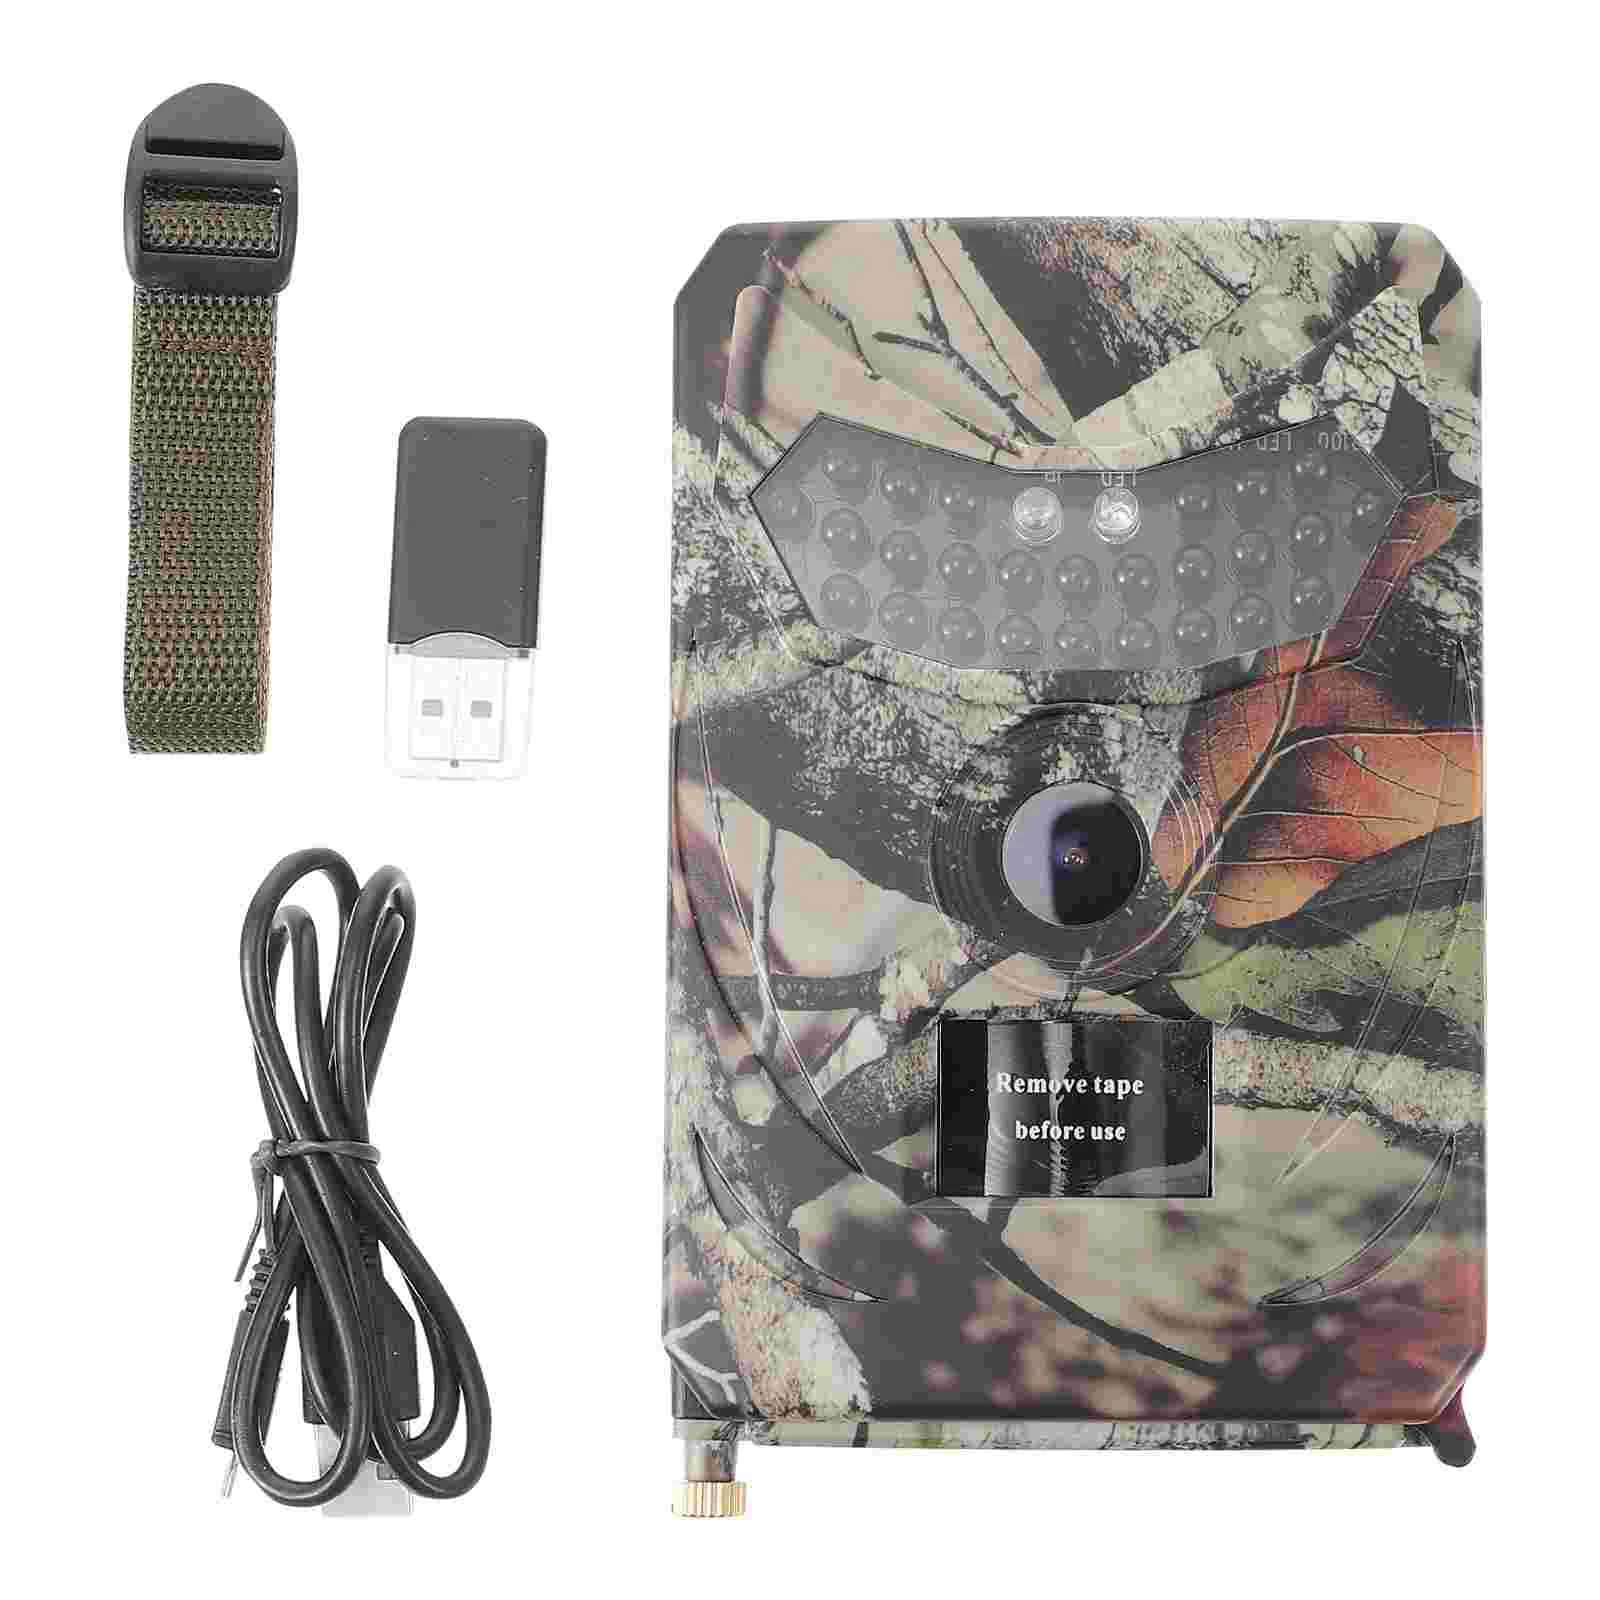 

1080 P Hunting Camera Scouting Night Vision Ir Water Proof Trail Waterproof Outdoor Trap